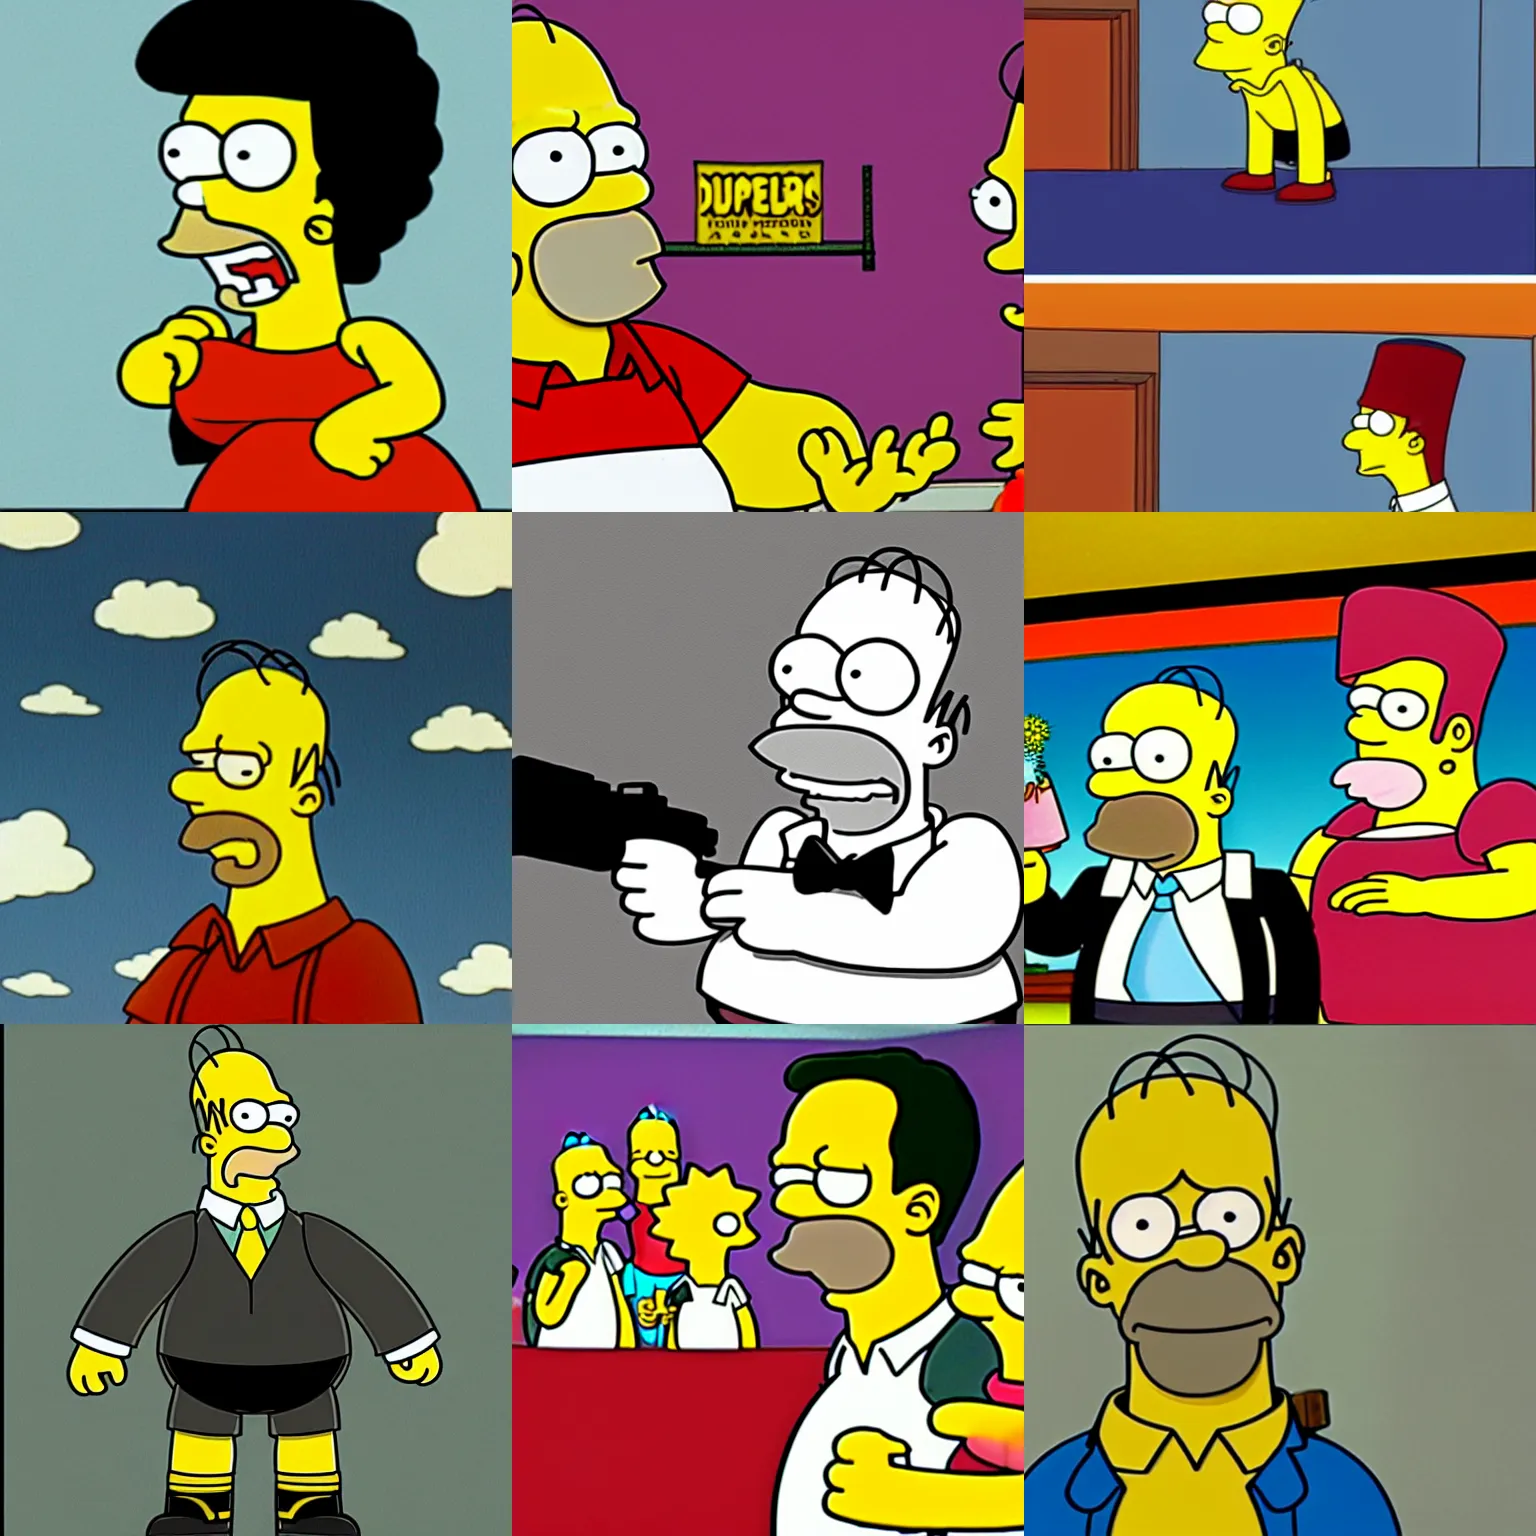 Prompt: Homer Simpson as a character in the movie Pulp Fiction